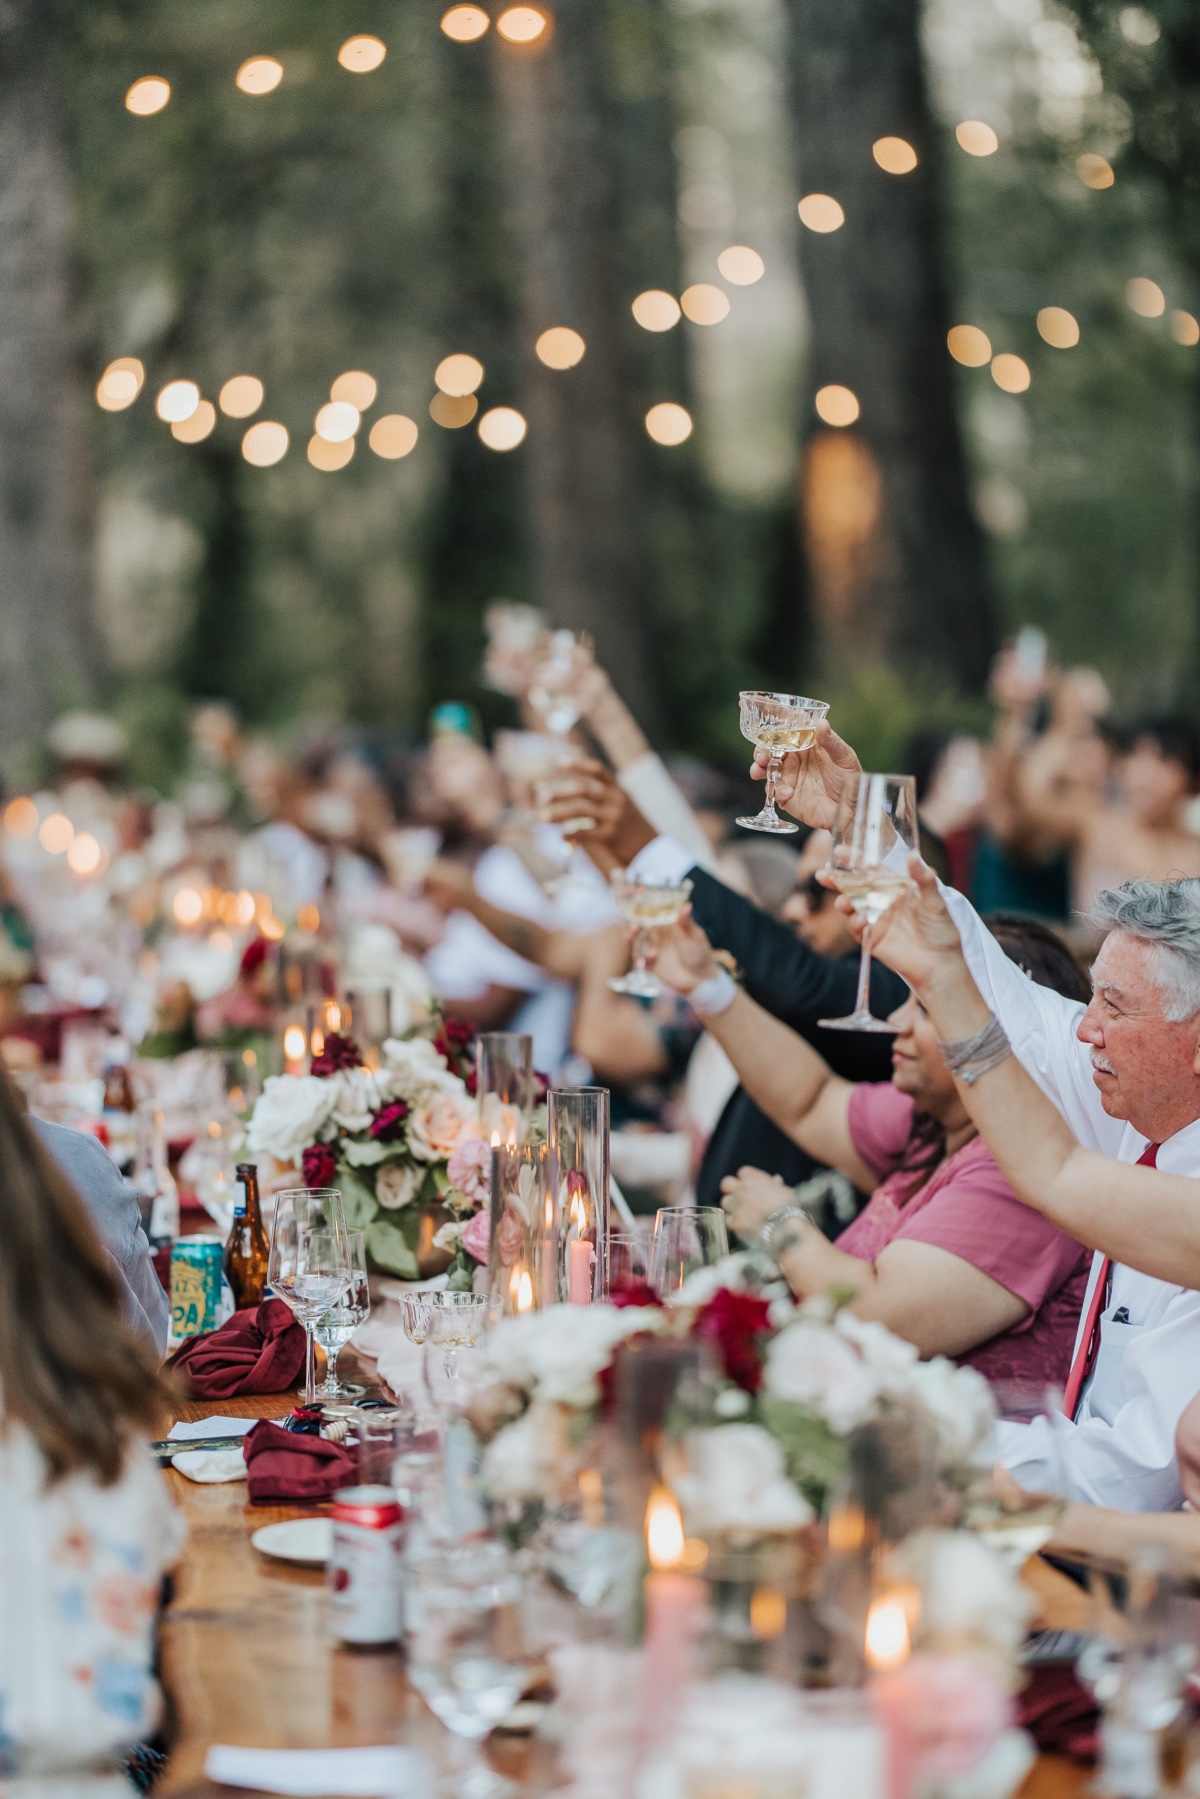 How to give a wedding toast